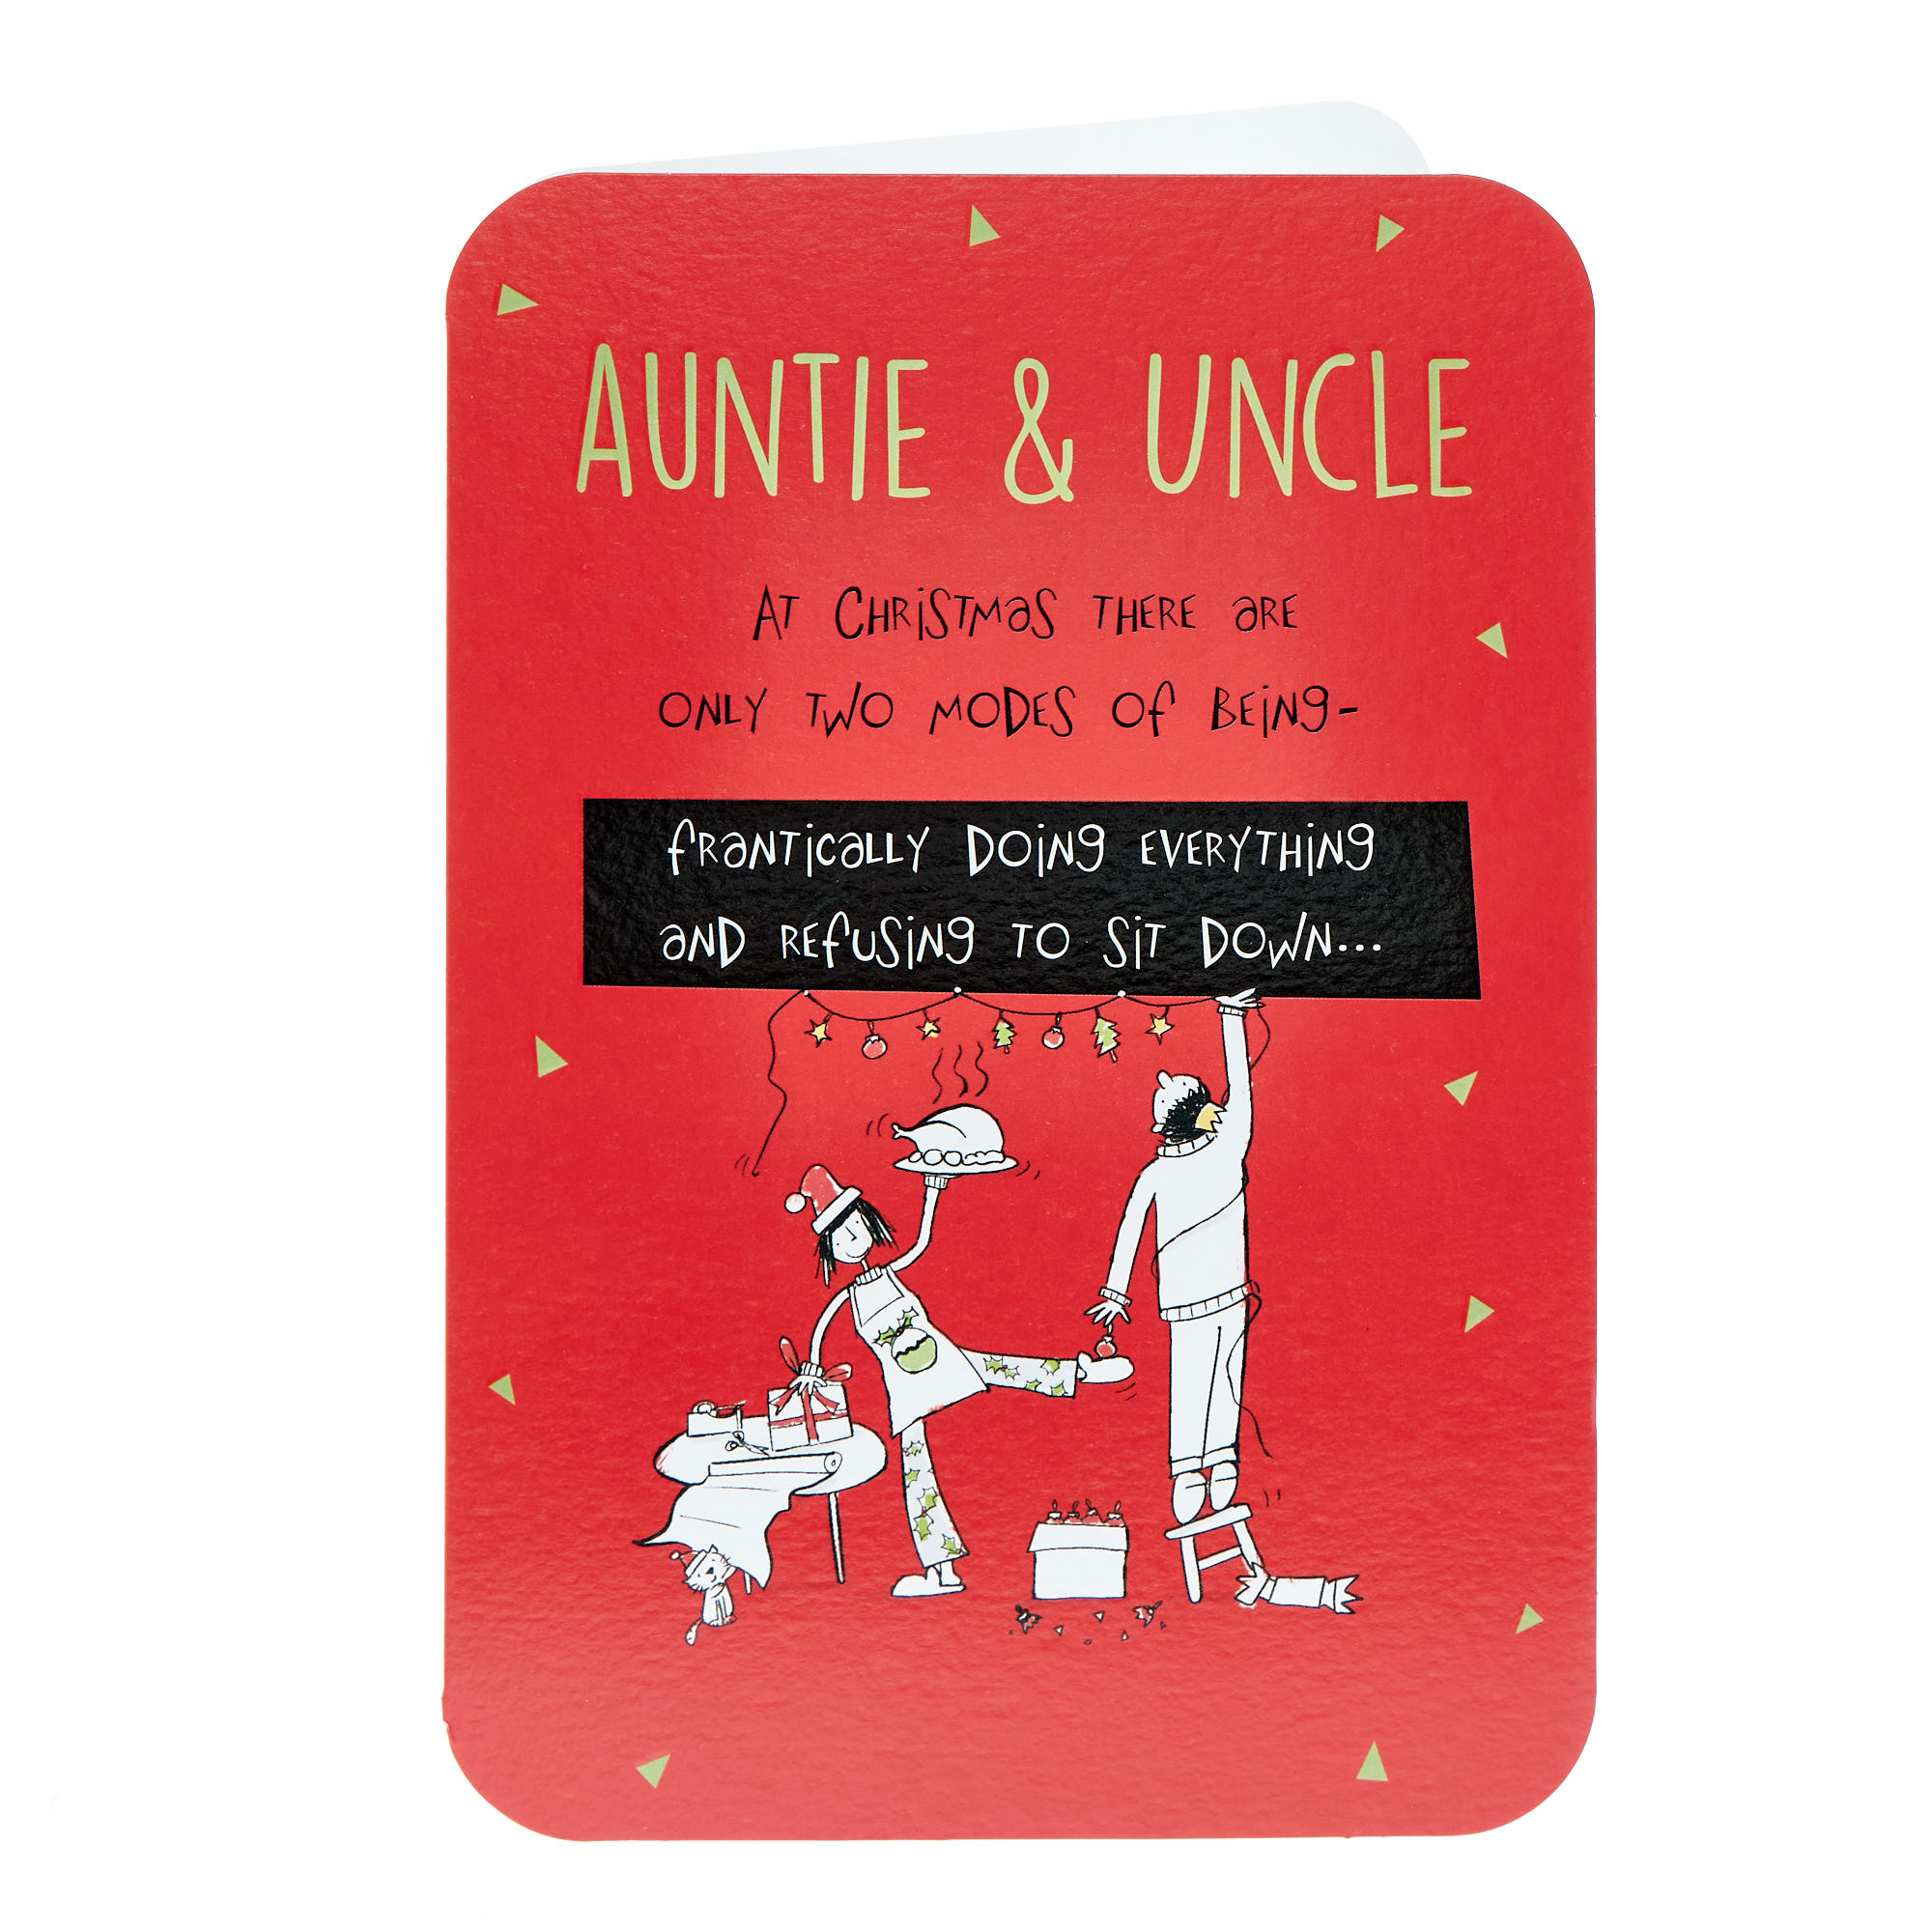 Auntie & Uncle Two Modes Christmas Card